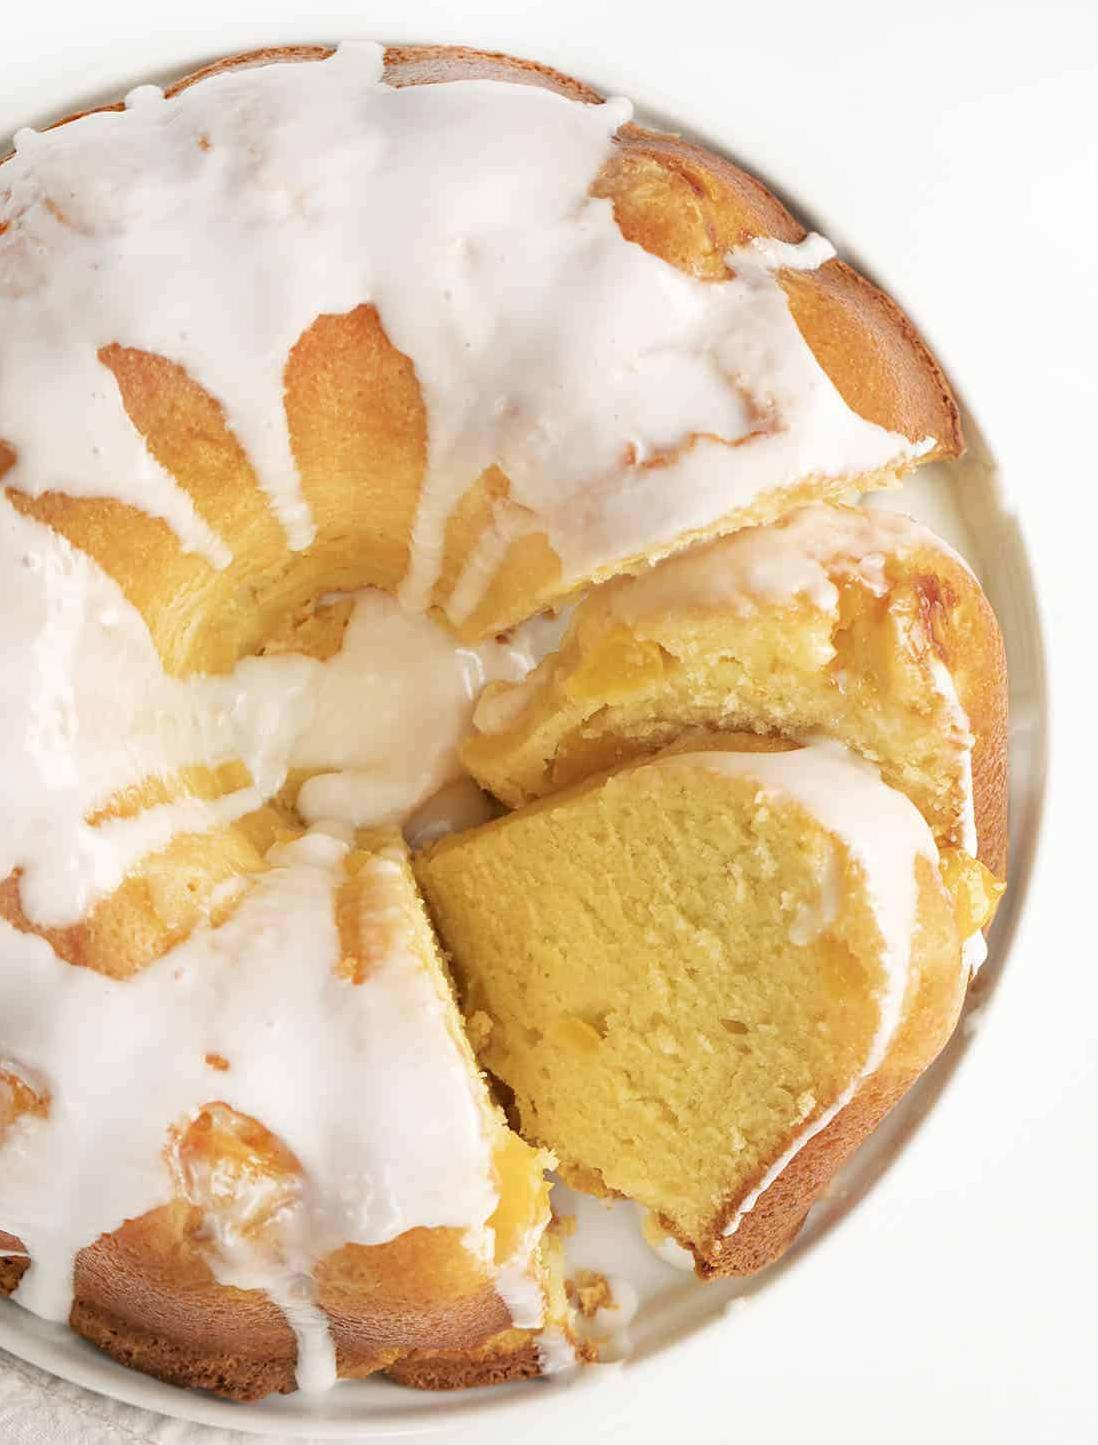  Slices of juicy peaches sit atop this perfectly golden pound cake